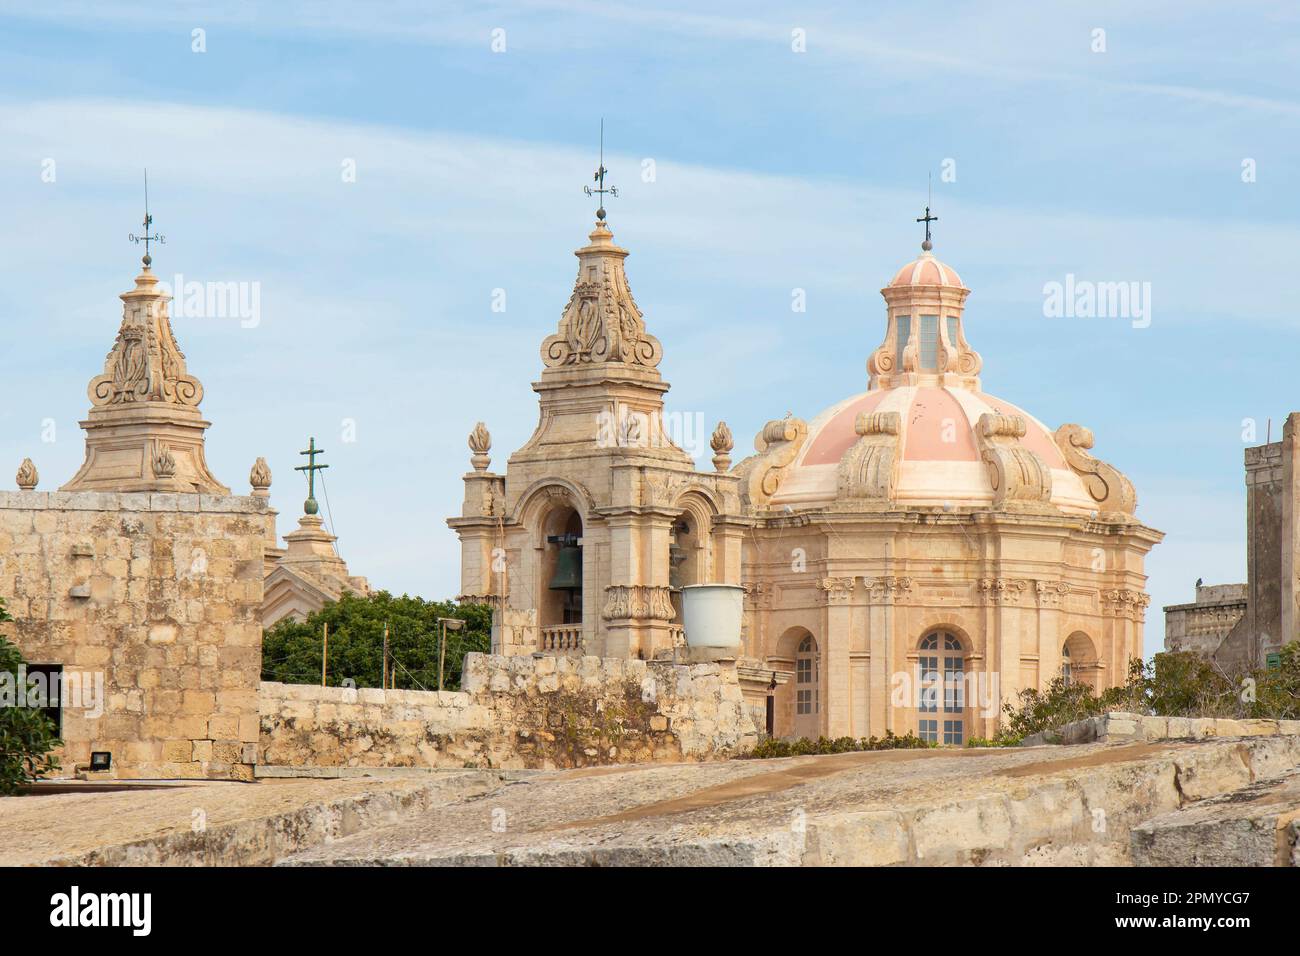 Mdina, Malta - November 13, 2022: The dome and belfries of St Paul's cathedral viewed  from outside the city walls Stock Photo